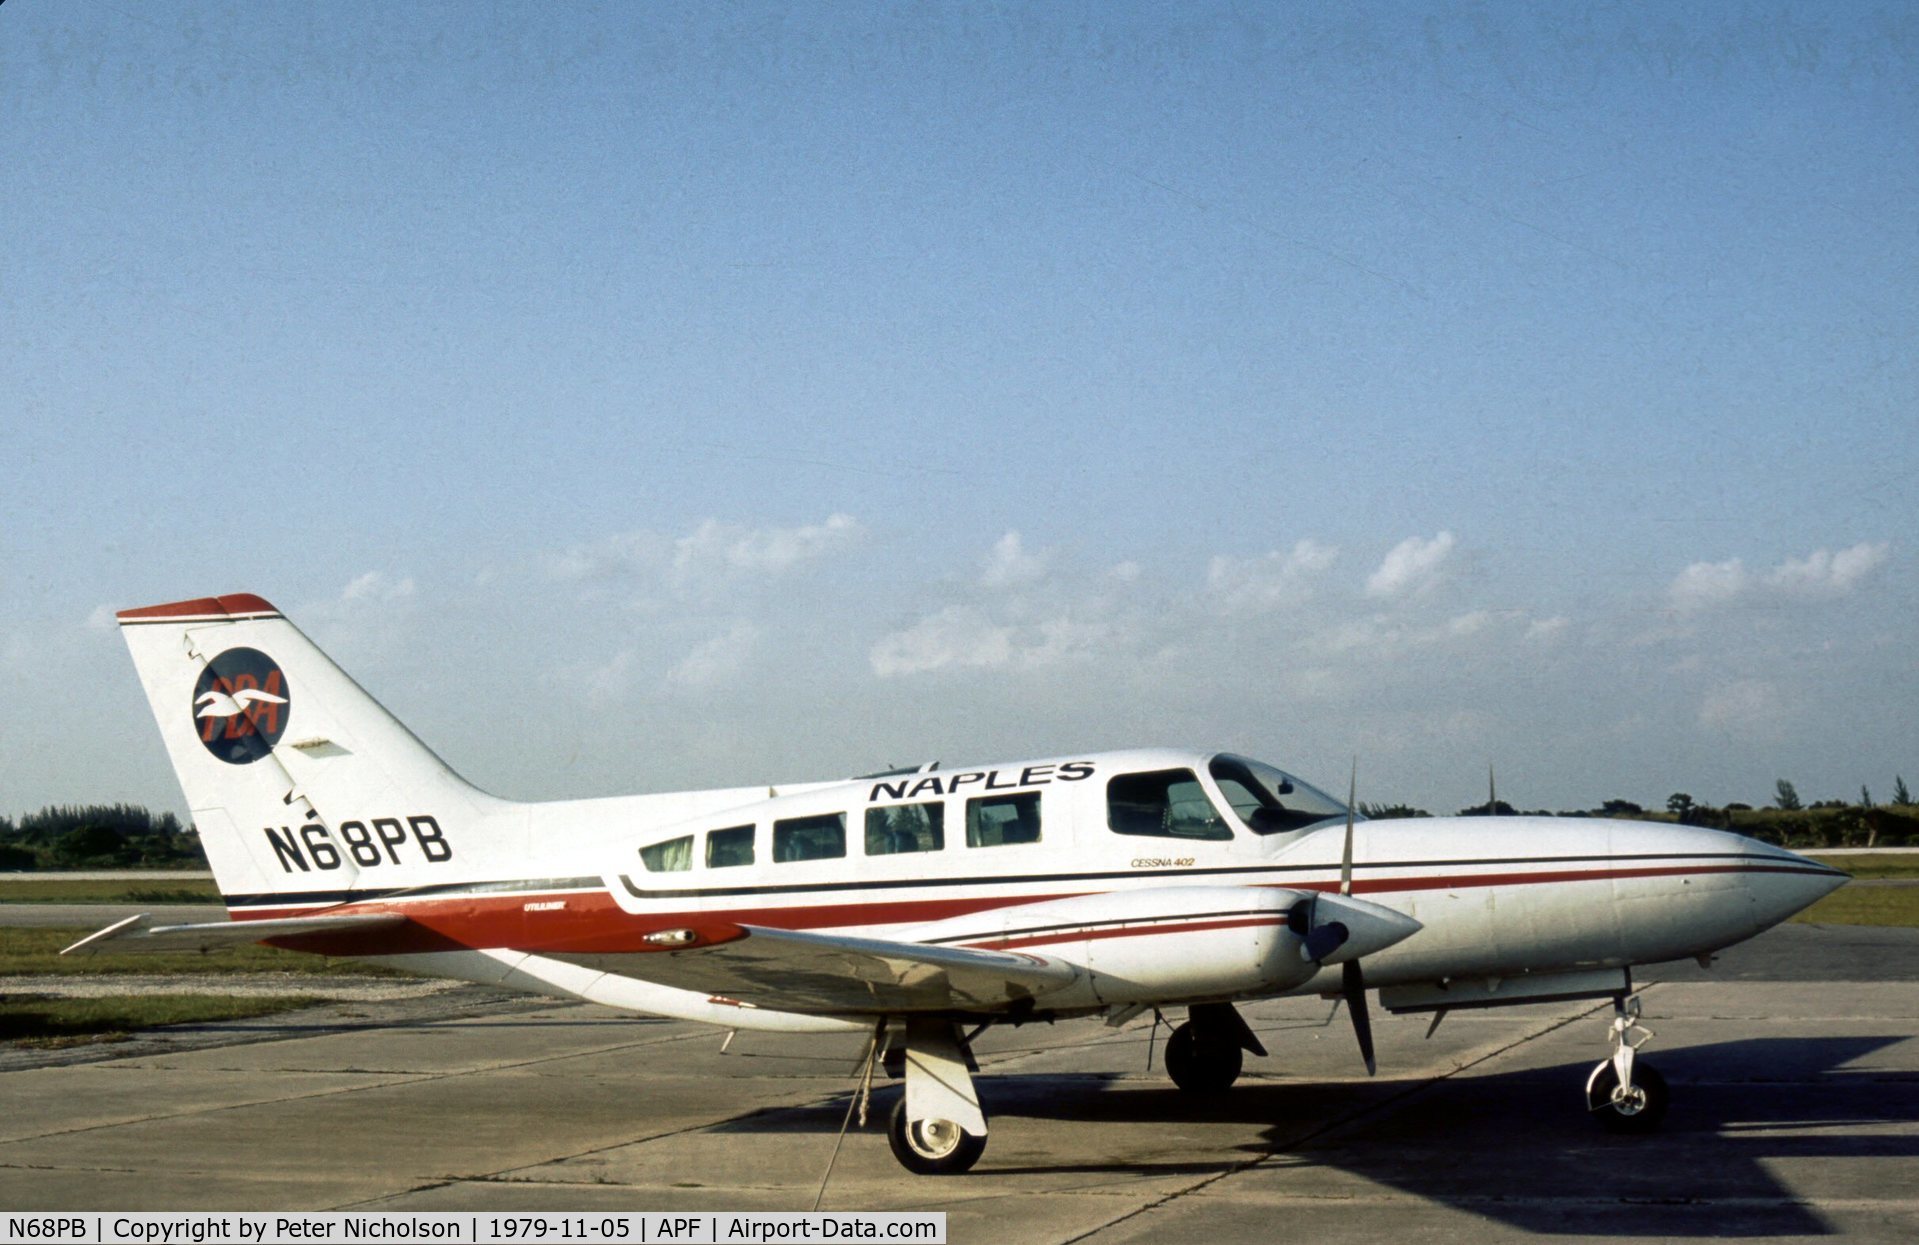 N68PB, 1979 Cessna 402C C/N 402C-0034, Cessna 402C of Naples Airlines division of Provincetown-Boston Airlines as seen at Naples in November 1979.